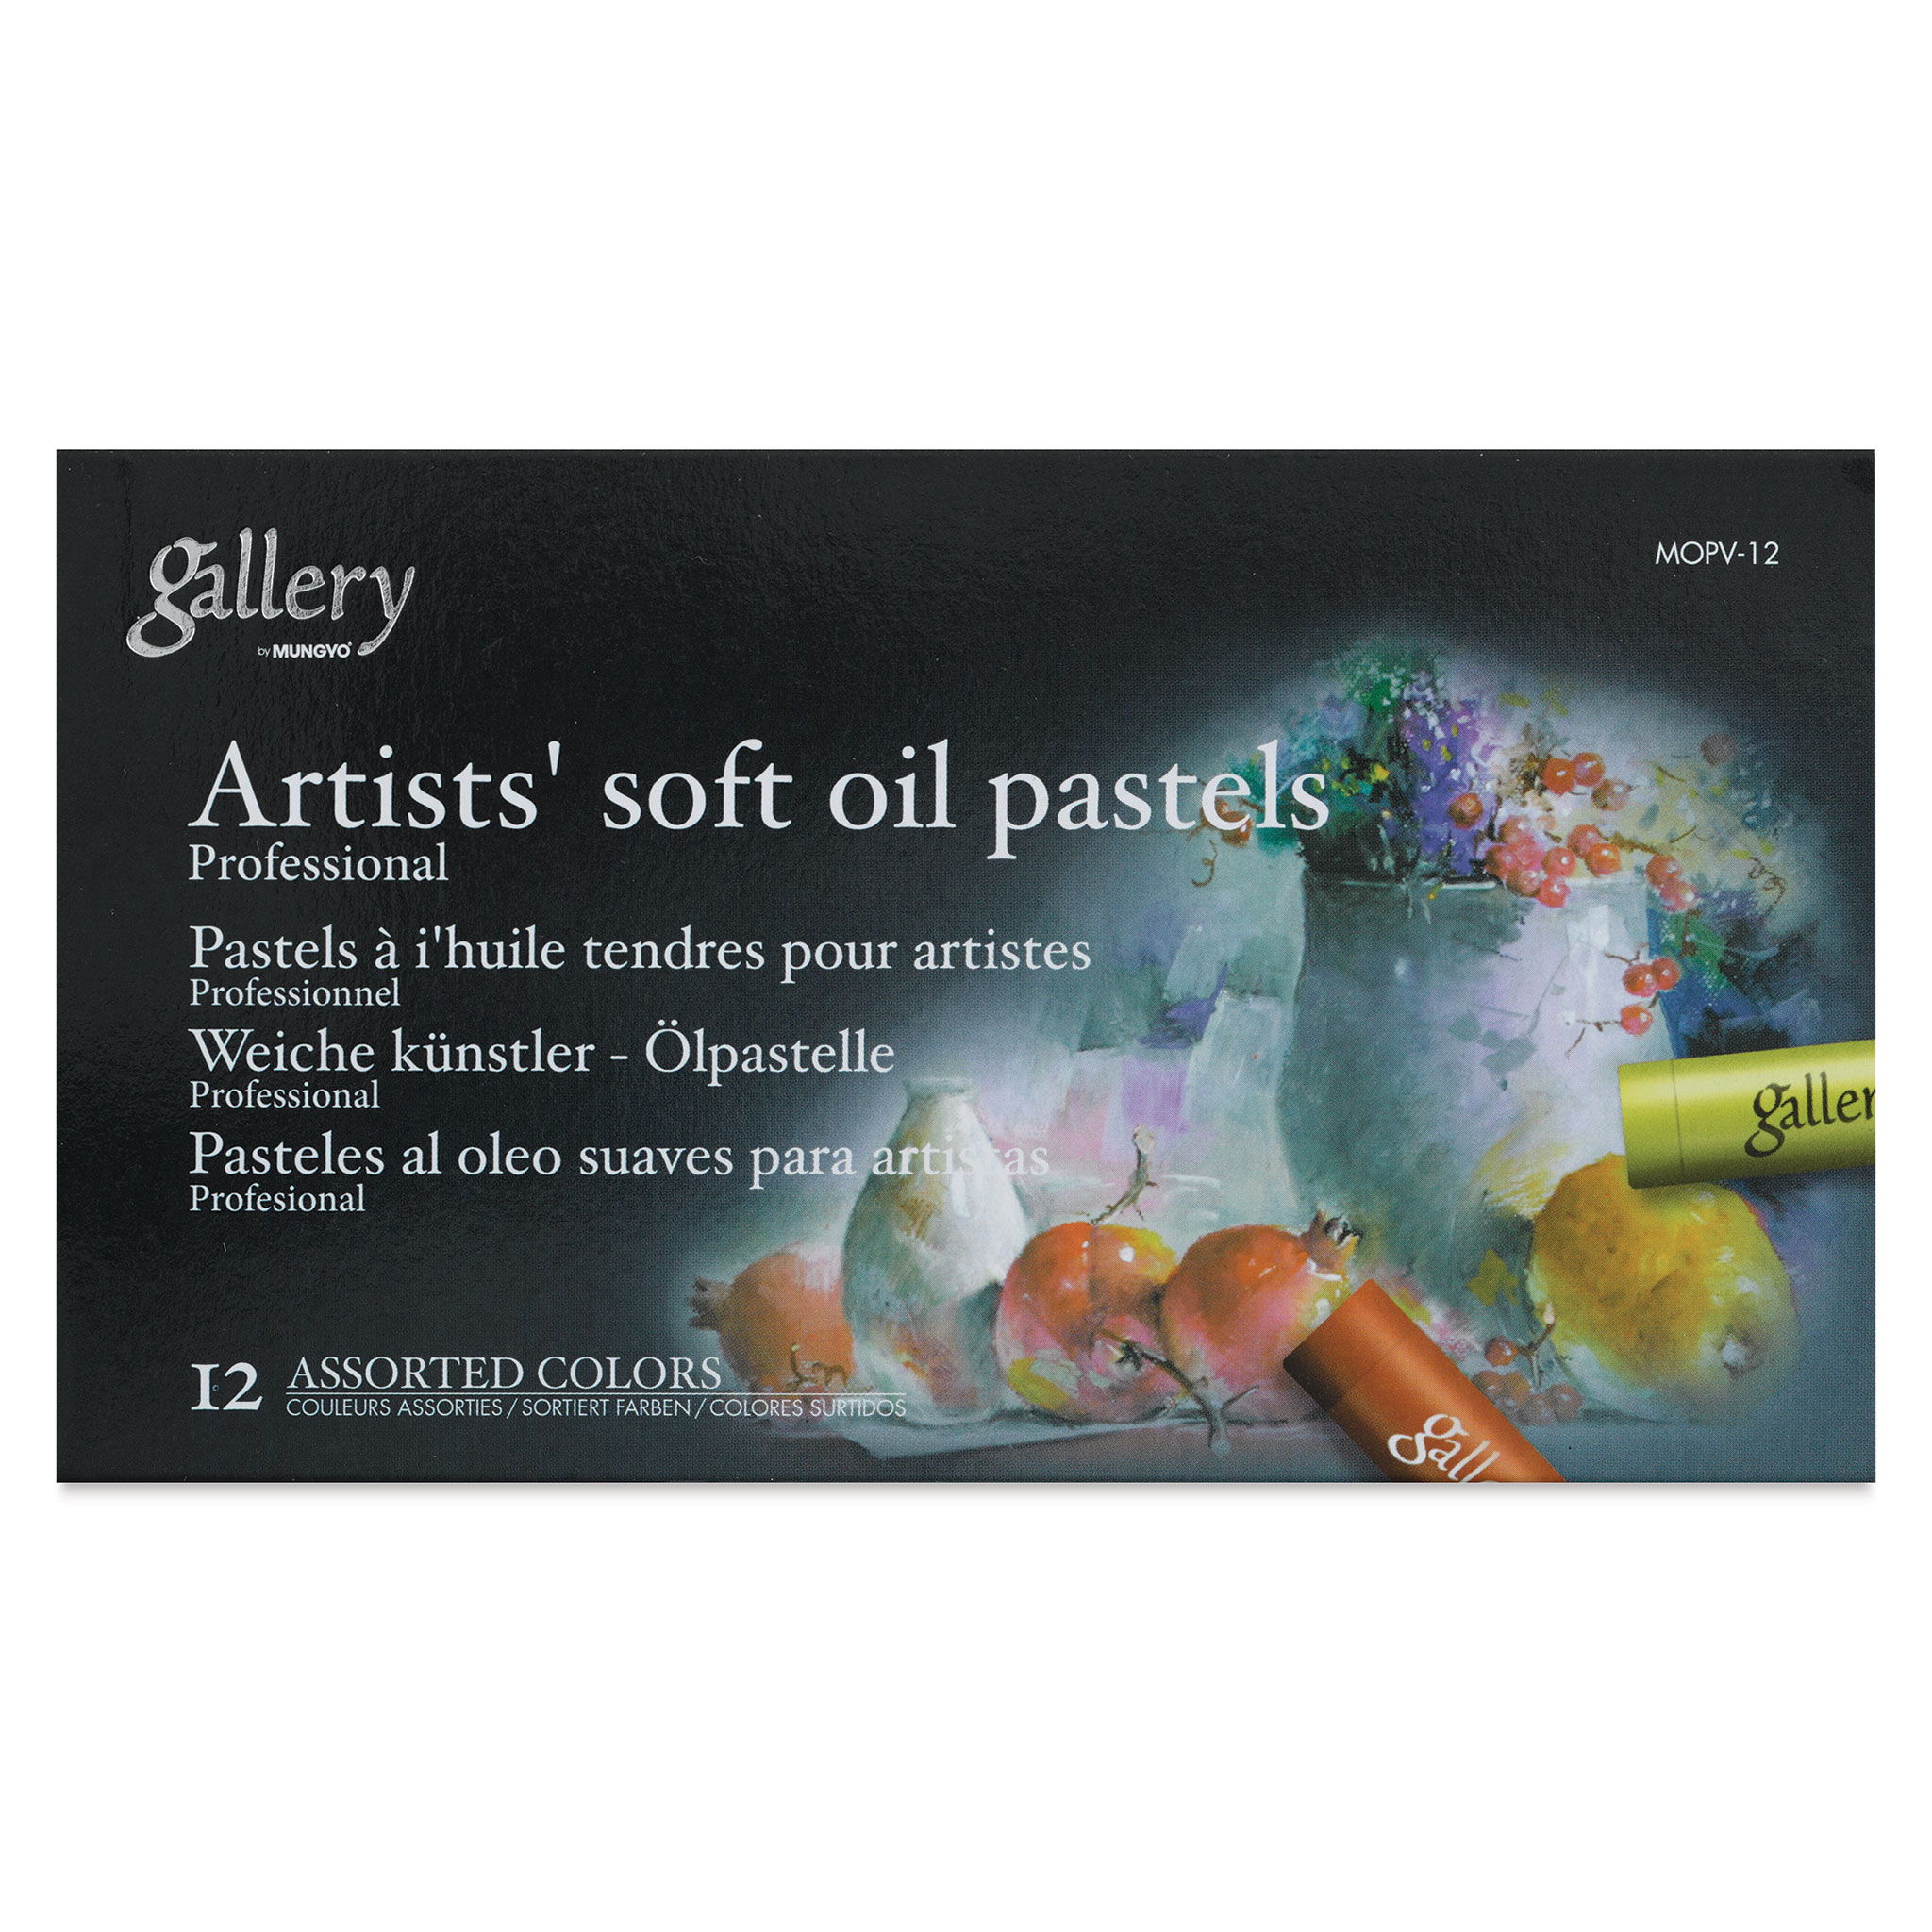 MUNGYO Gallery Artists Soft Oil Pastels MOPV-12 Cardboard Box of 12 Colors